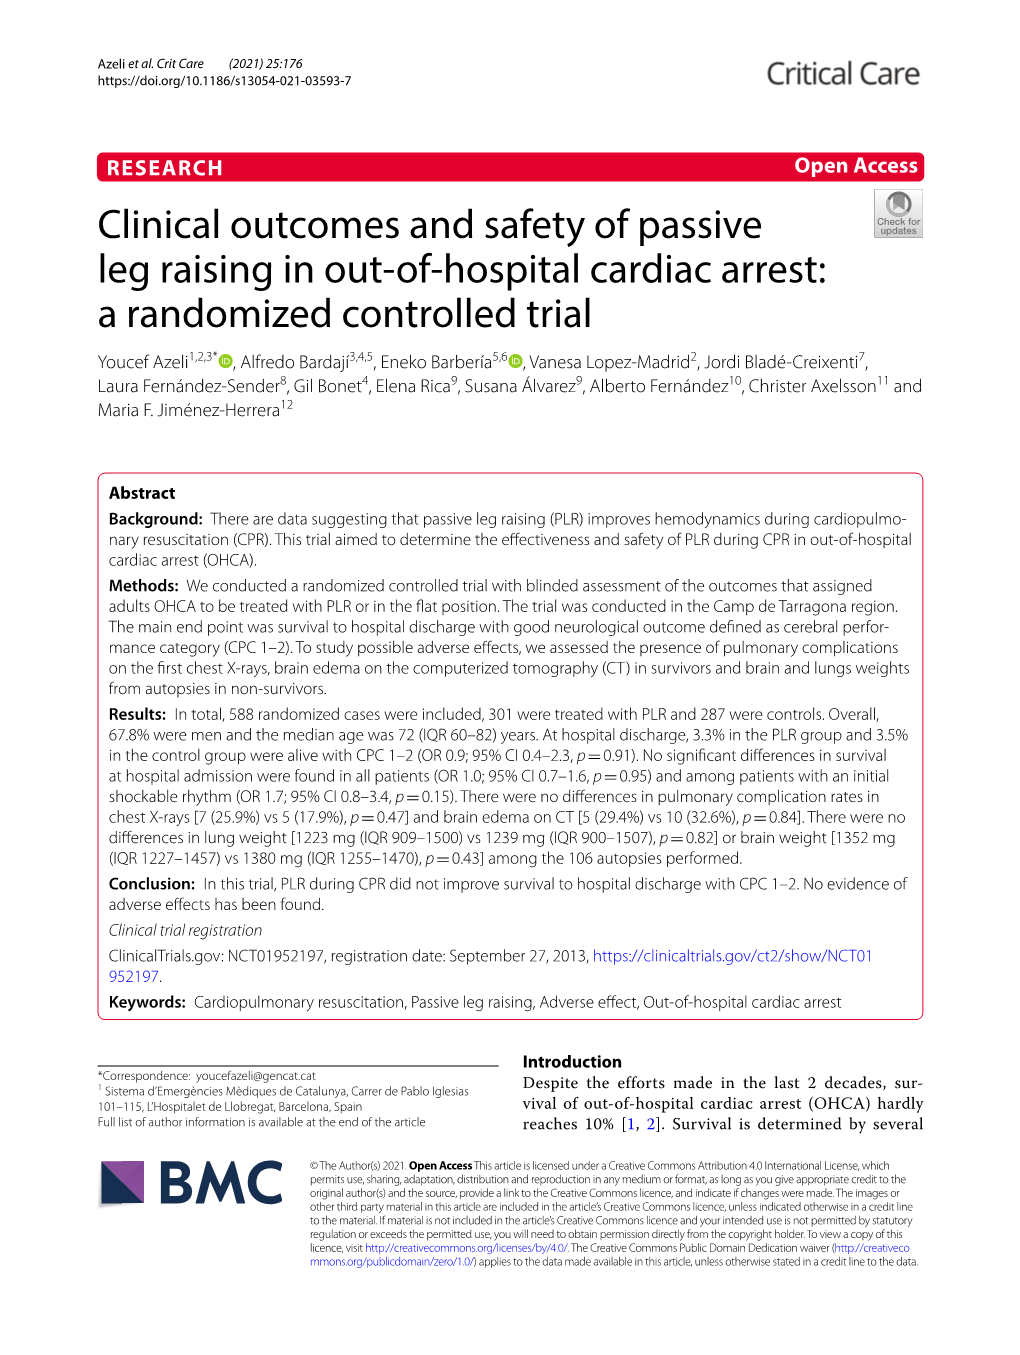 Clinical Outcomes and Safety of Passive Leg Raising in Out-Of